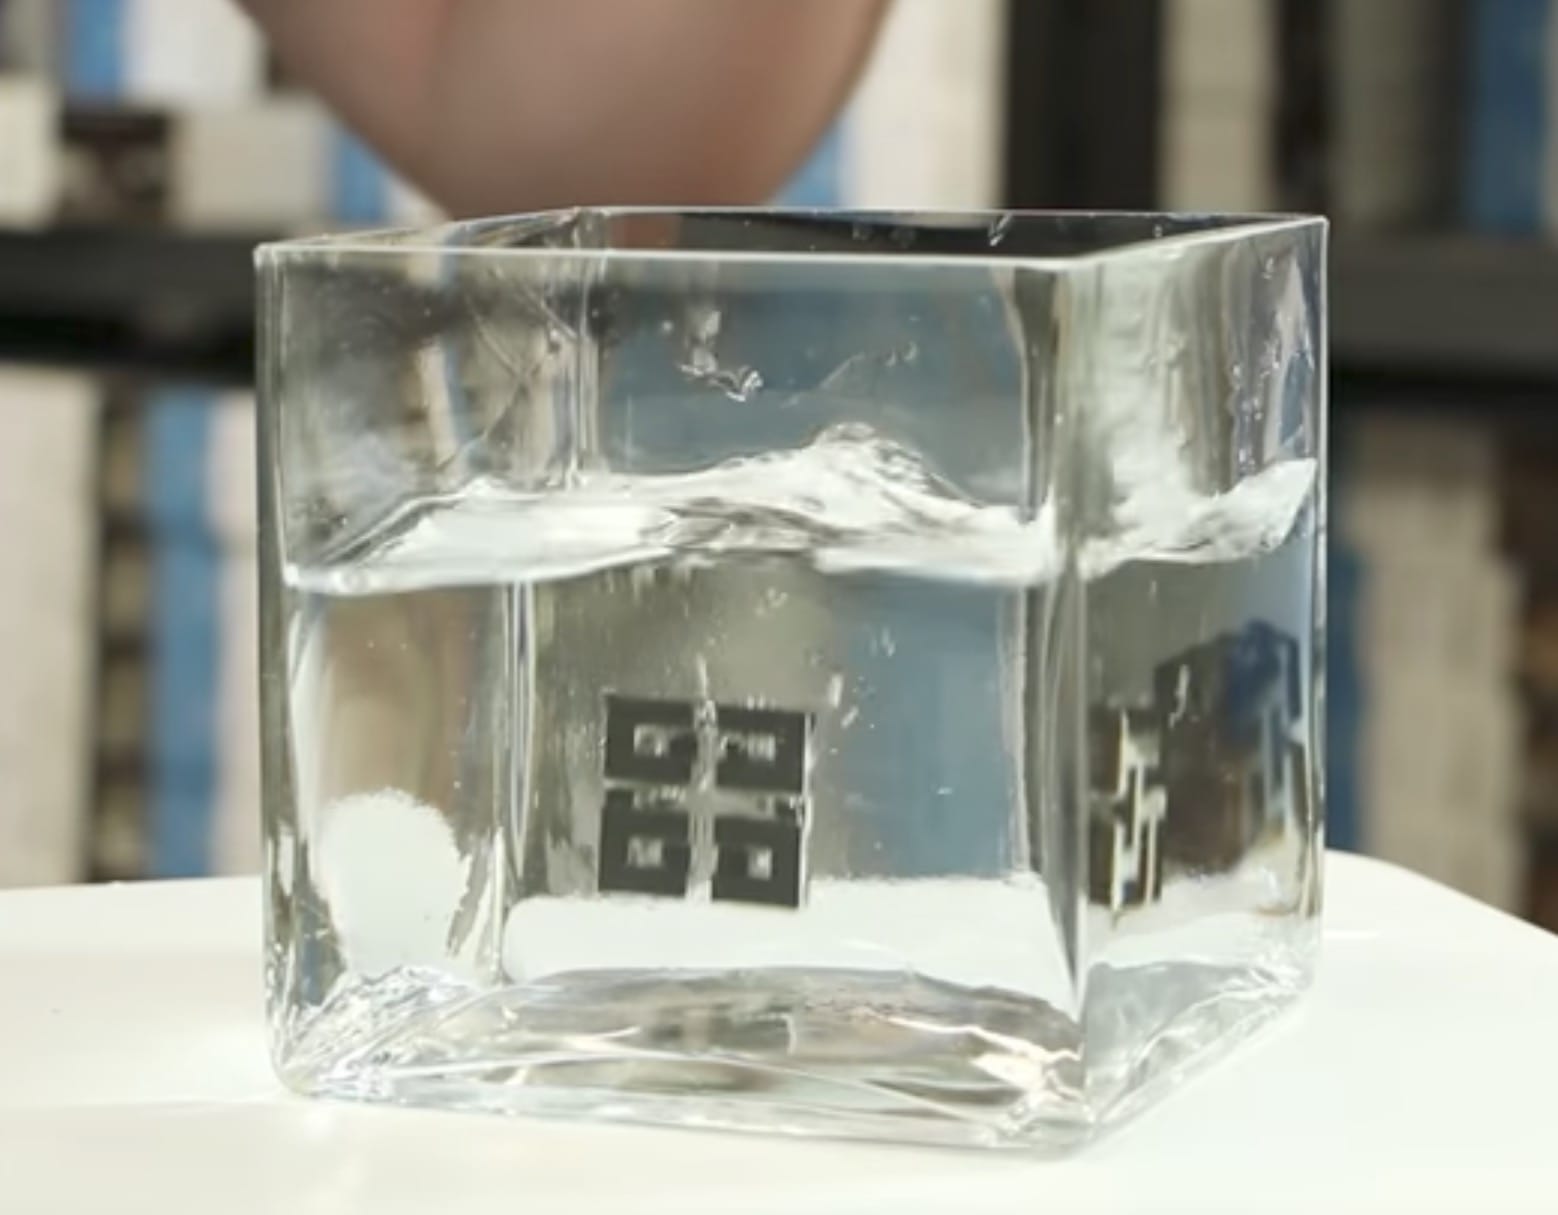  A 3D printed object with water-soluble support 